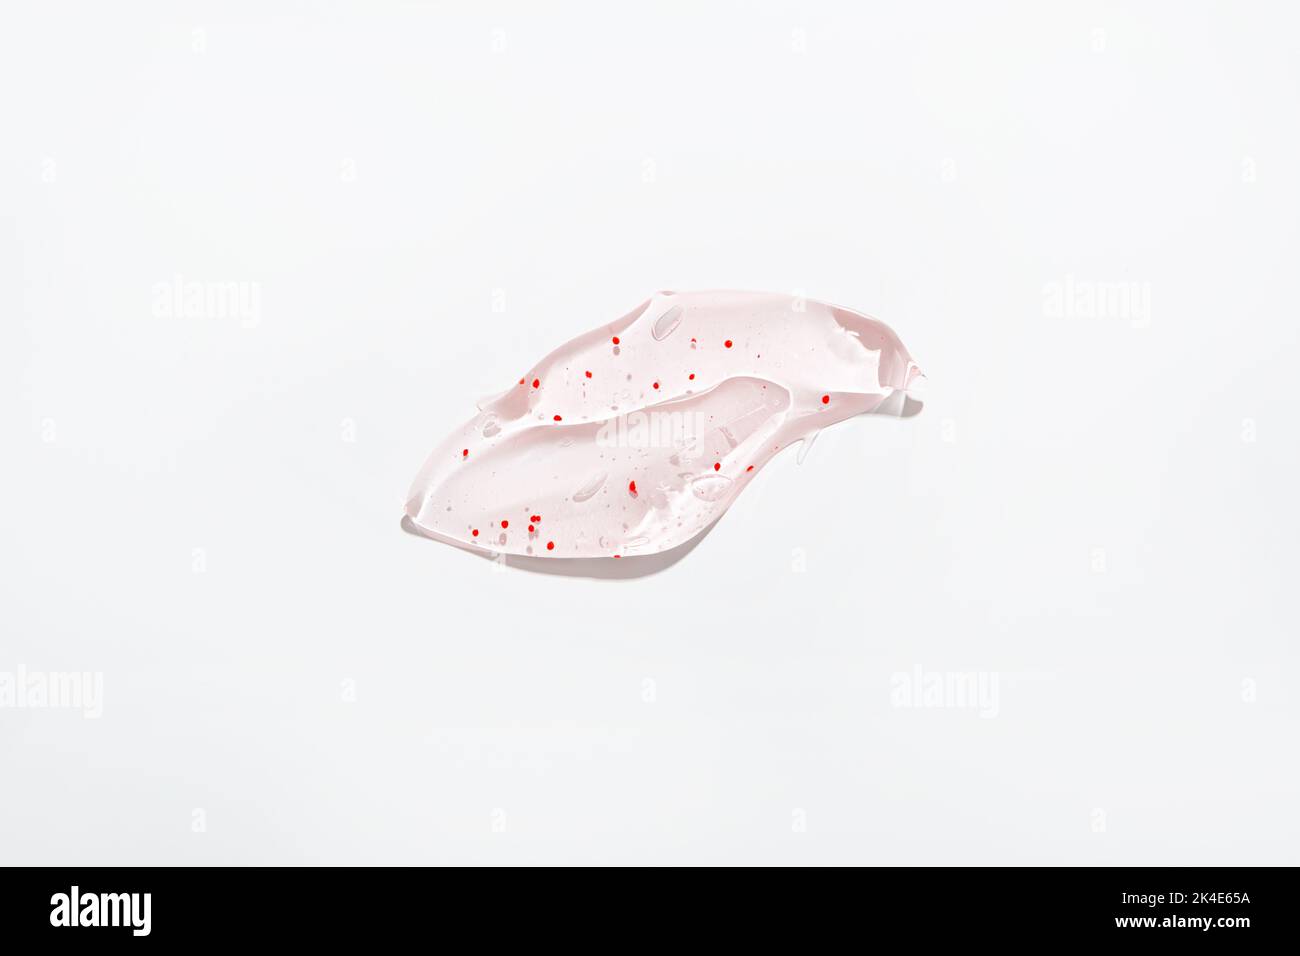 Skin care concept moisturising gel with exfoliating particles top view on ligt surface Stock Photo